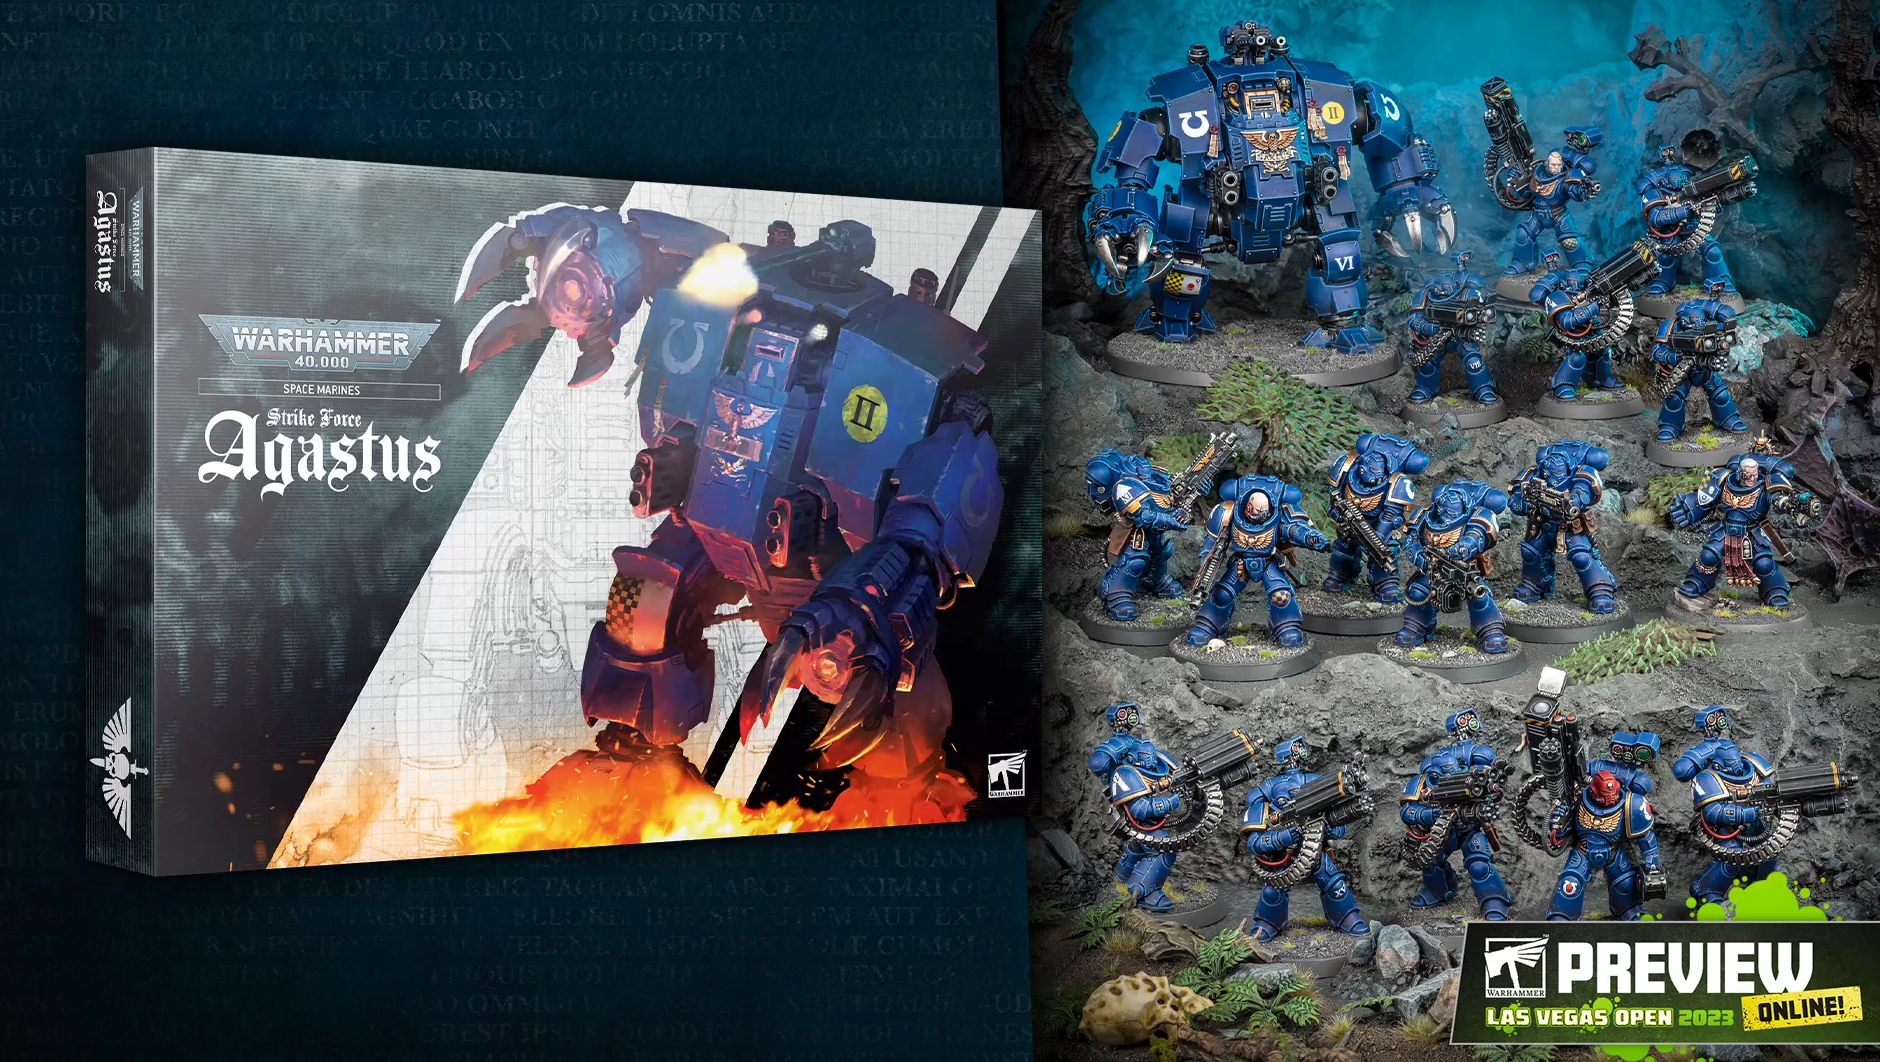 New Space Marines Releases